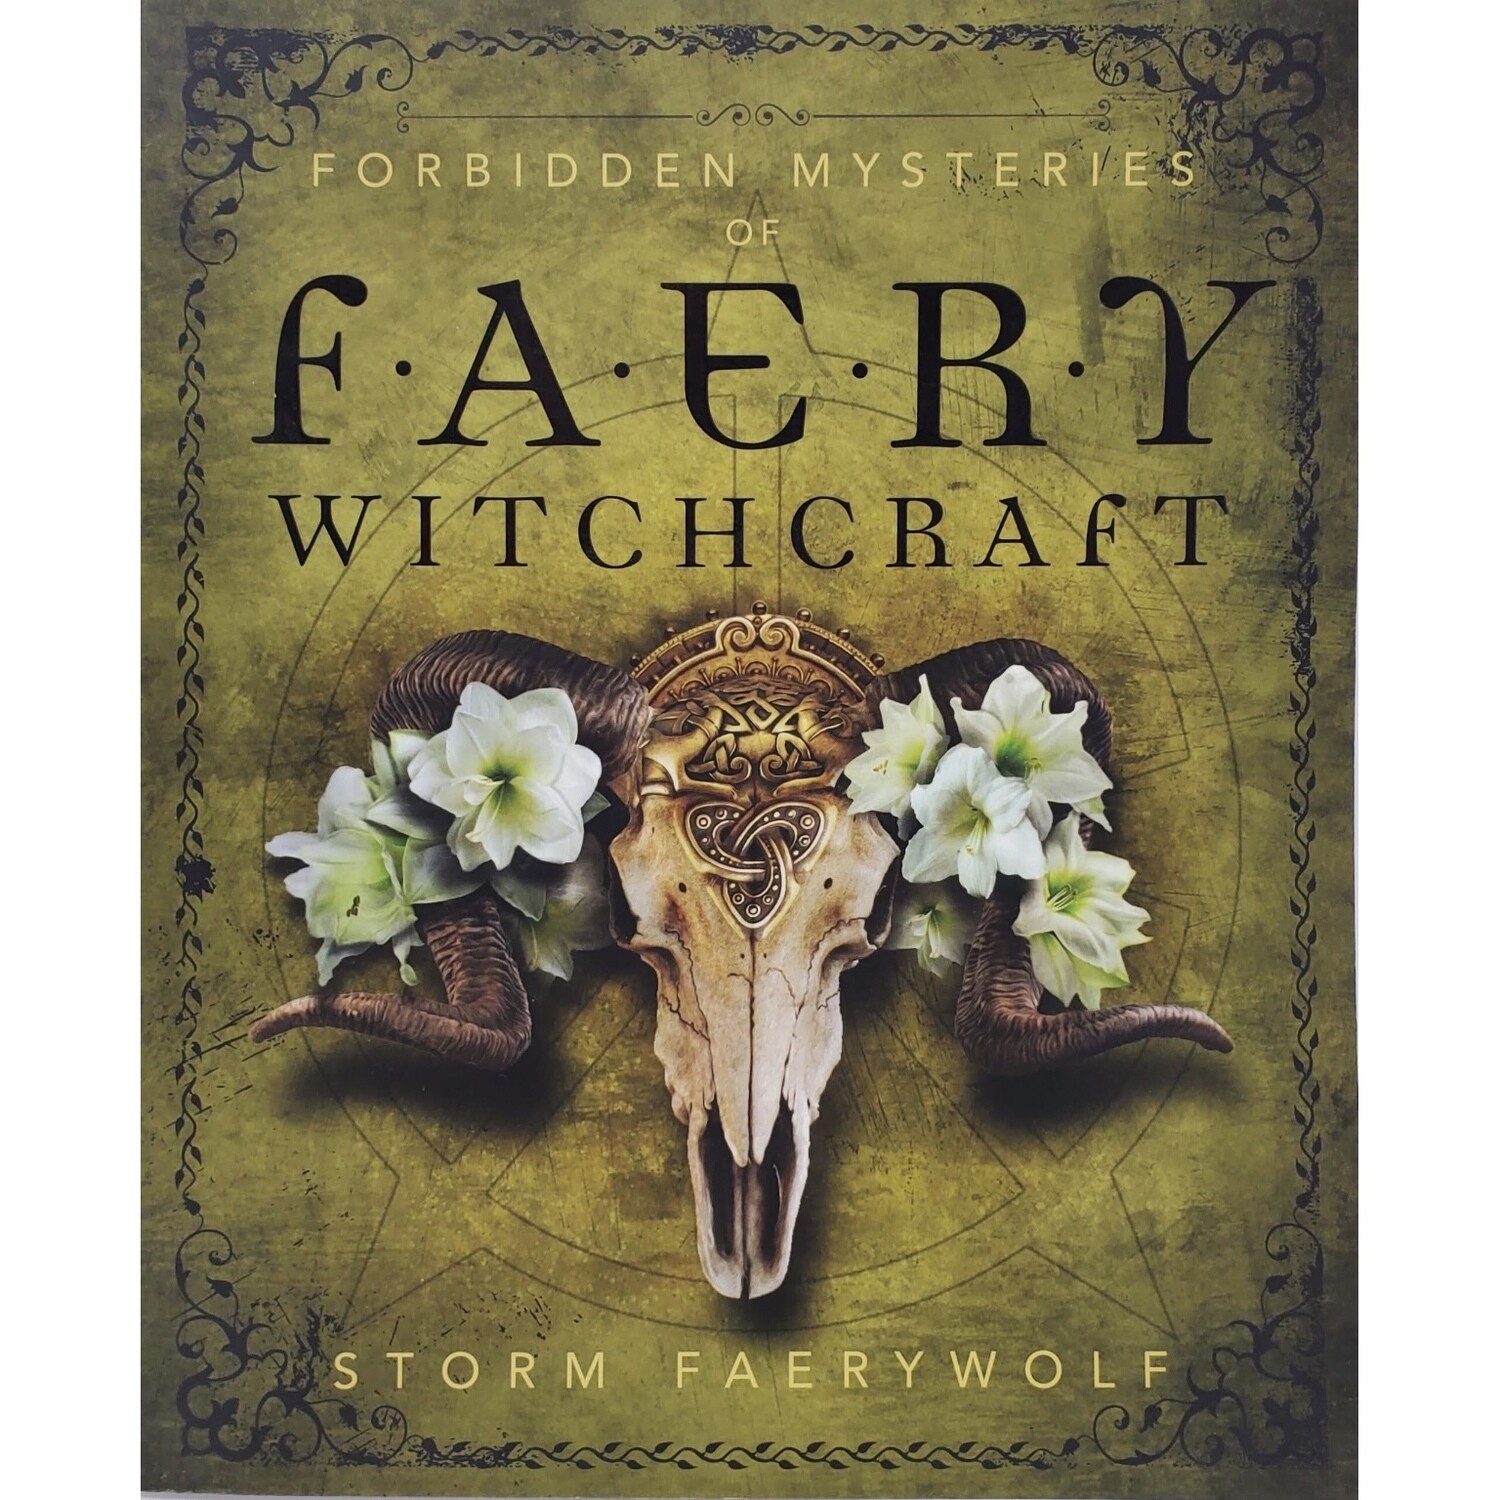 FORBIDDEN MYSTERIES OF FAERY WITCHCRAFT